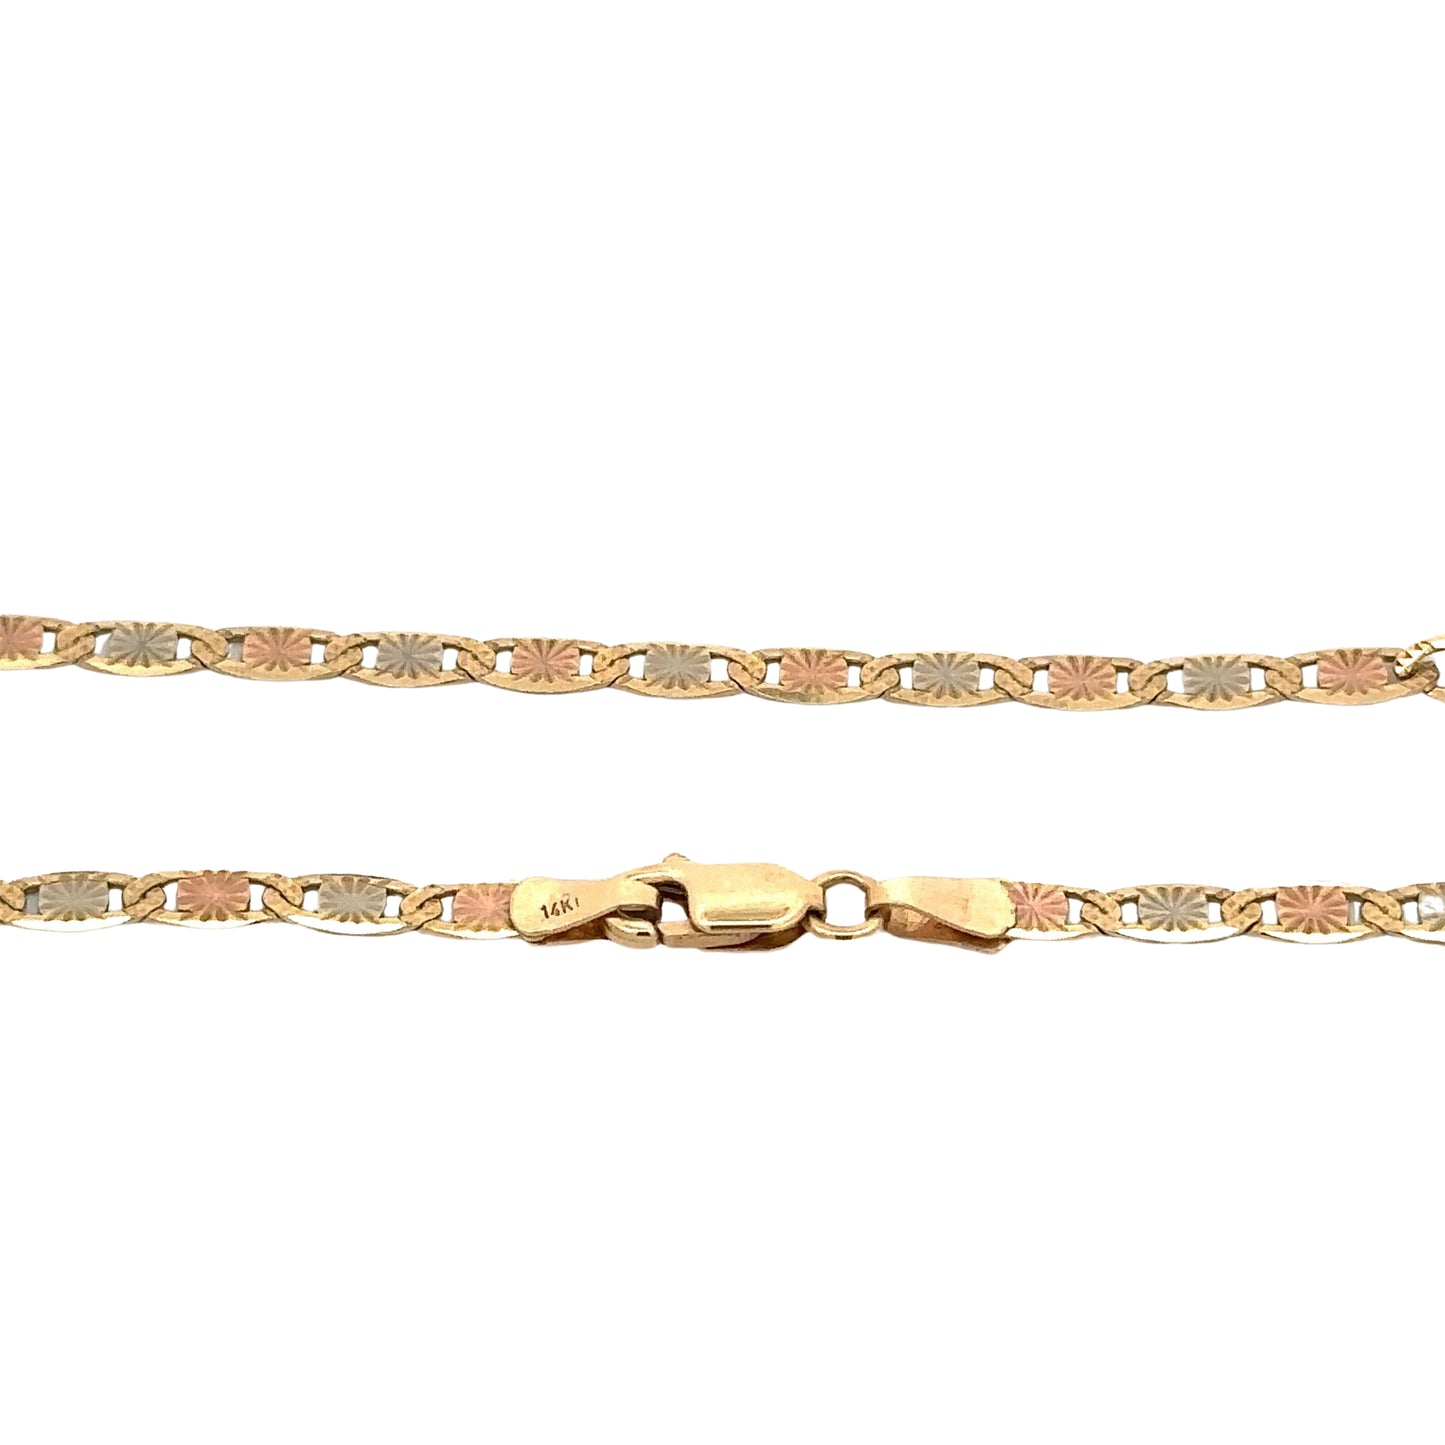 close up of mariner chain with yellow gold clasp and 14K stamp